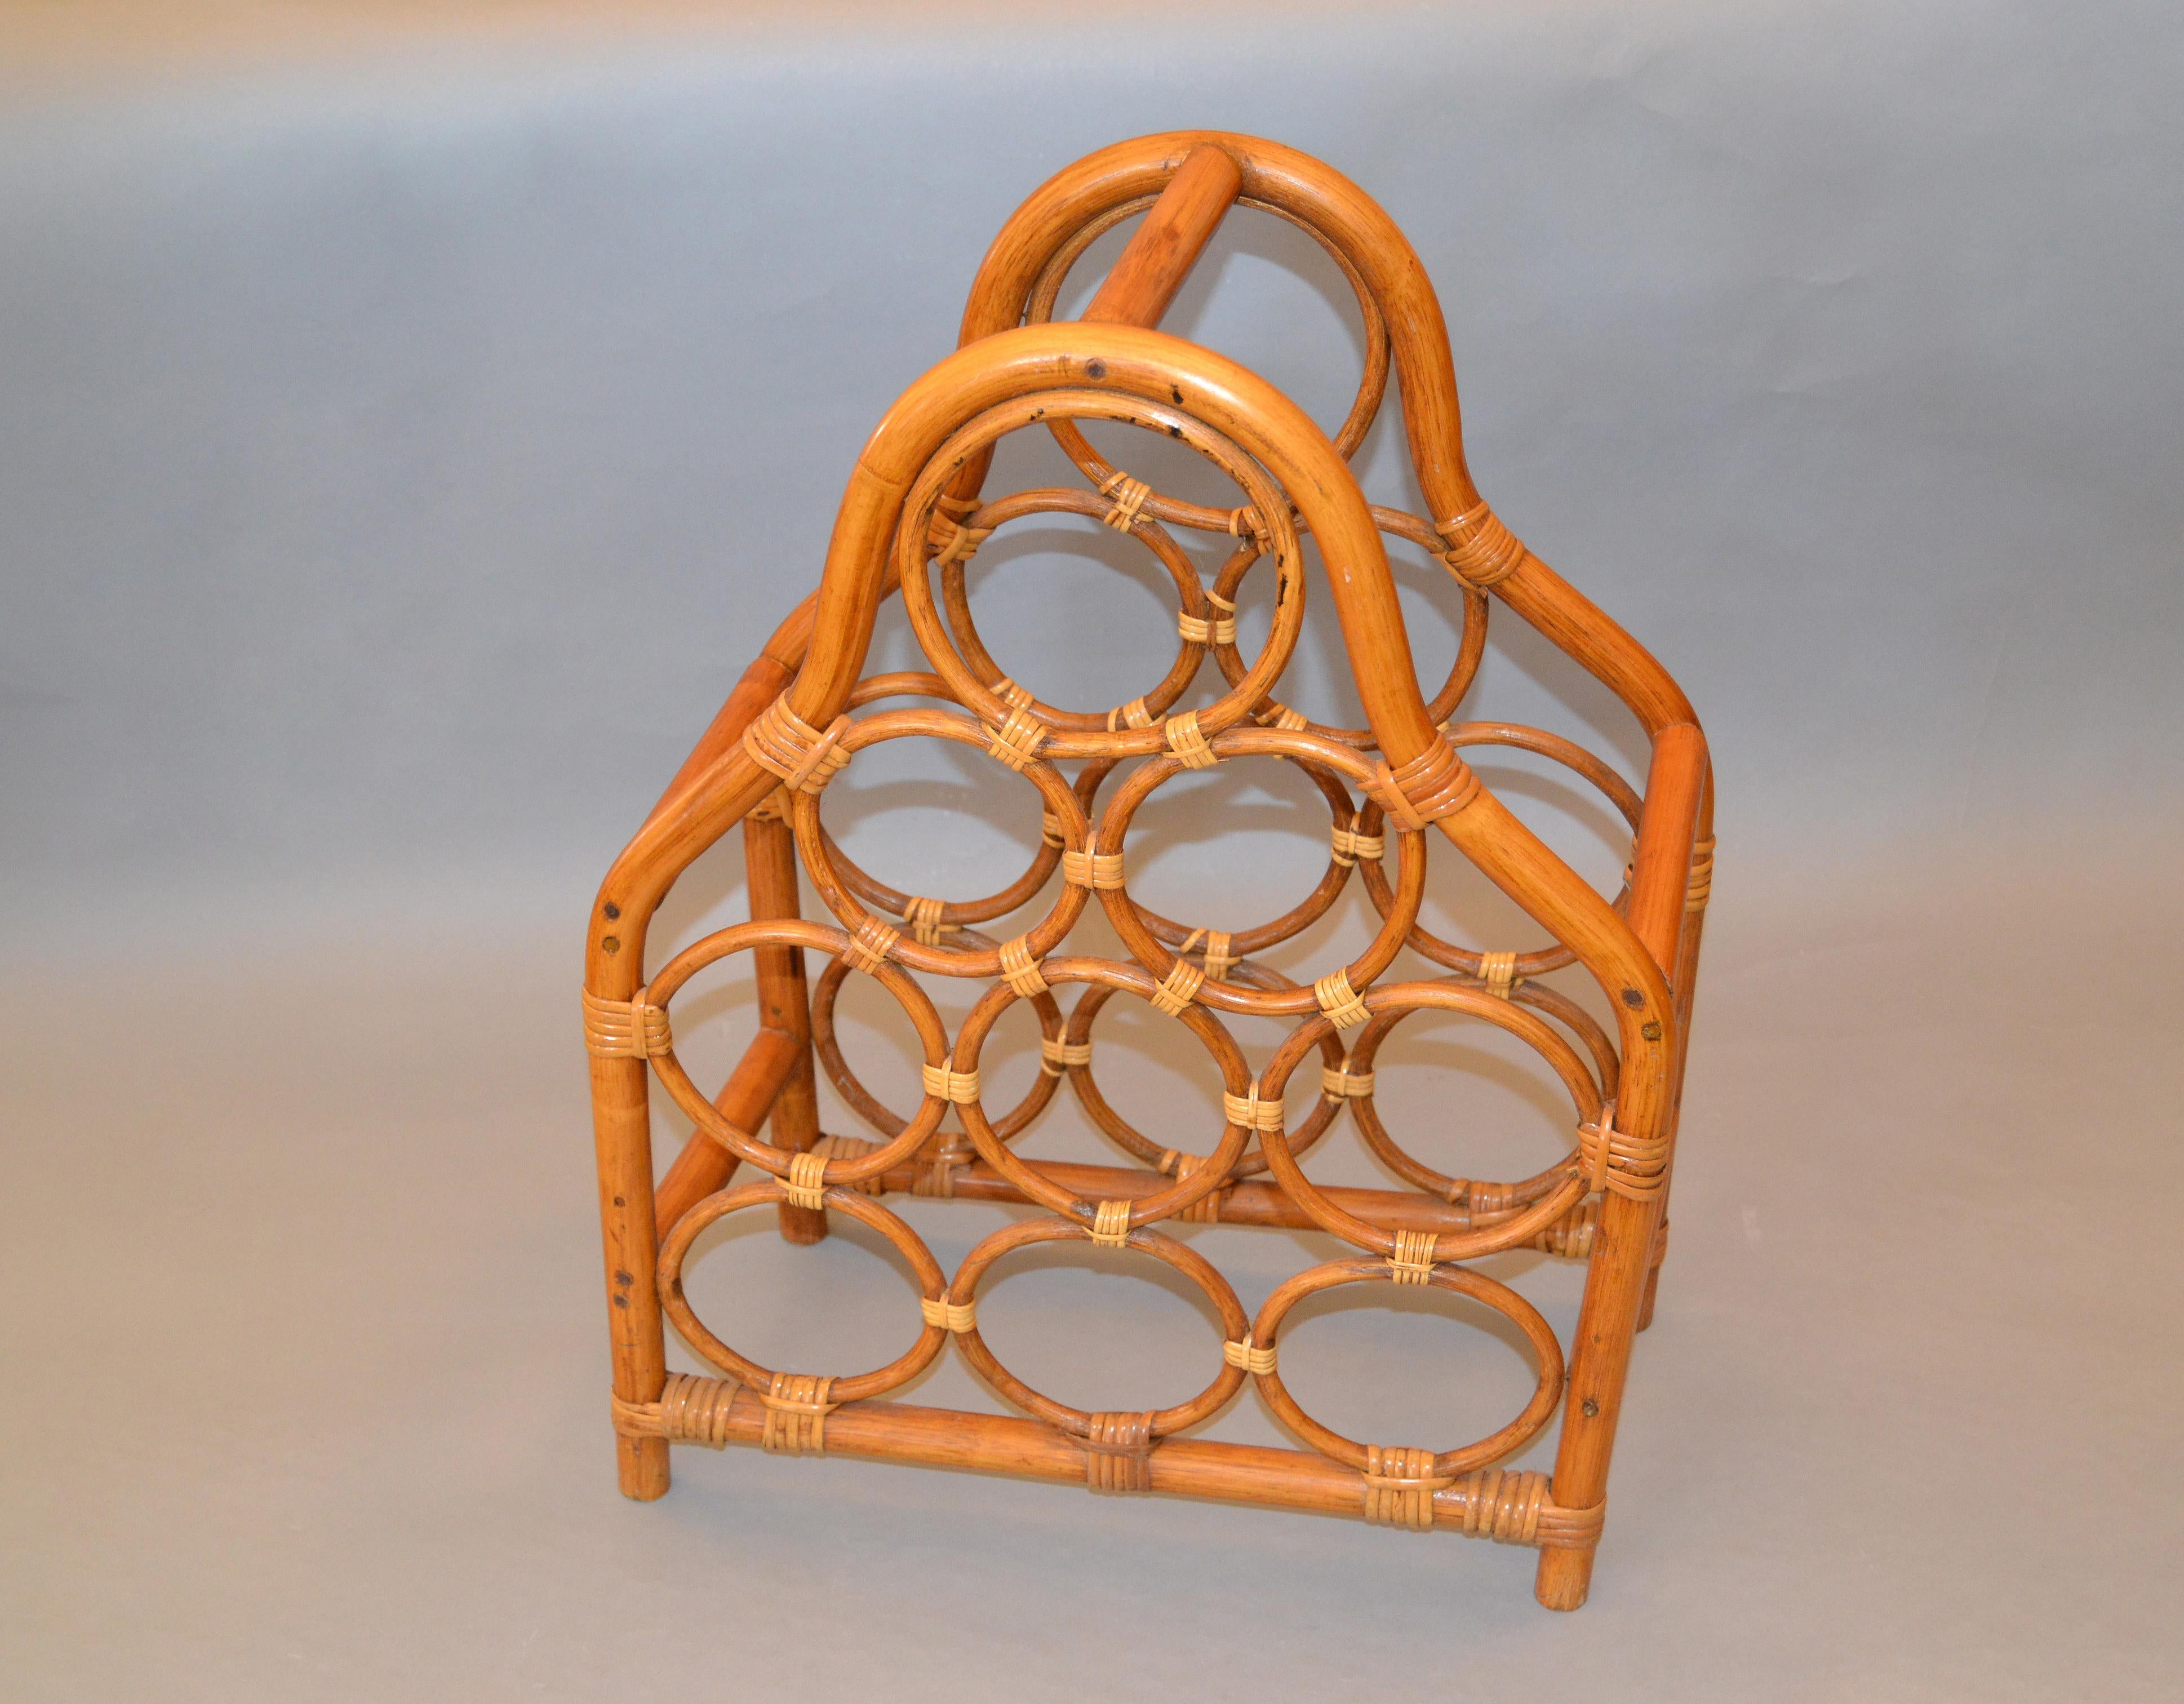 Vintage boho chic handcrafted bamboo and rattan nine bottle wine rack, wine storage, wine basket.
The wine caddy, basket is sturdy crafted and is easy to carry.
It is made to hold 9 bottles.